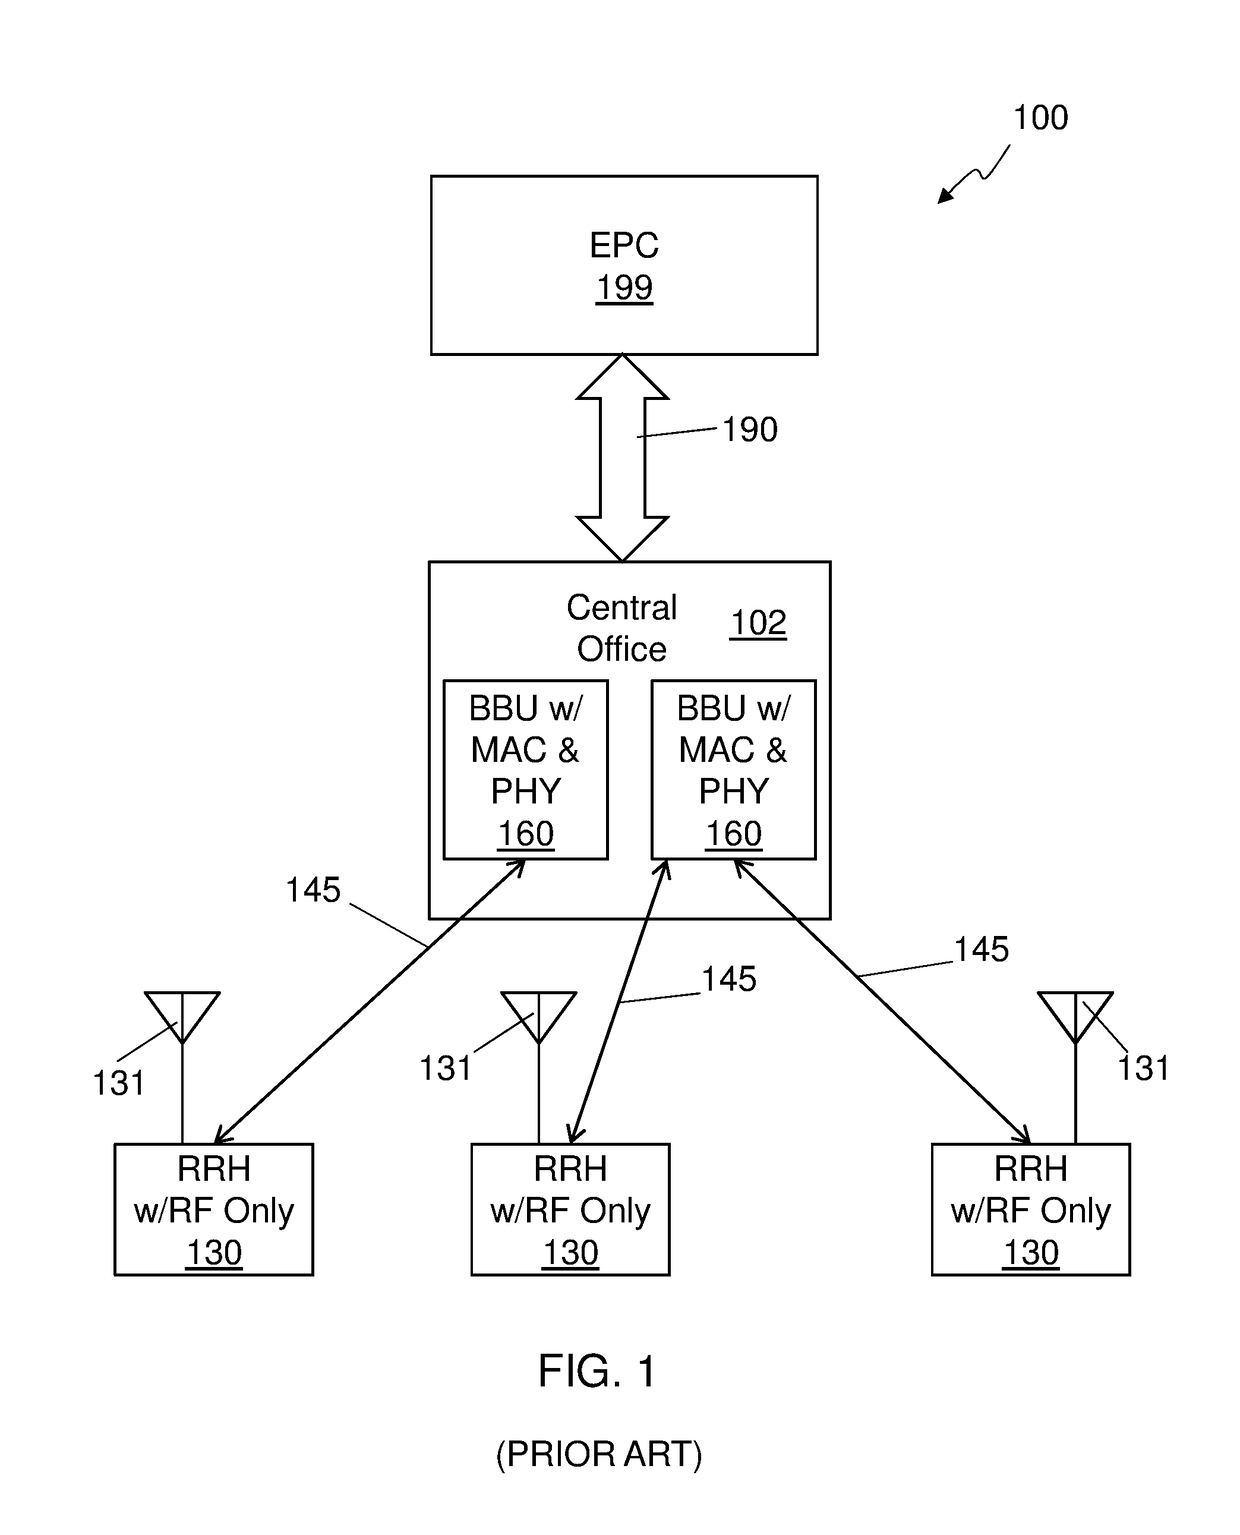 Virtualization and orchestration of a radio access network